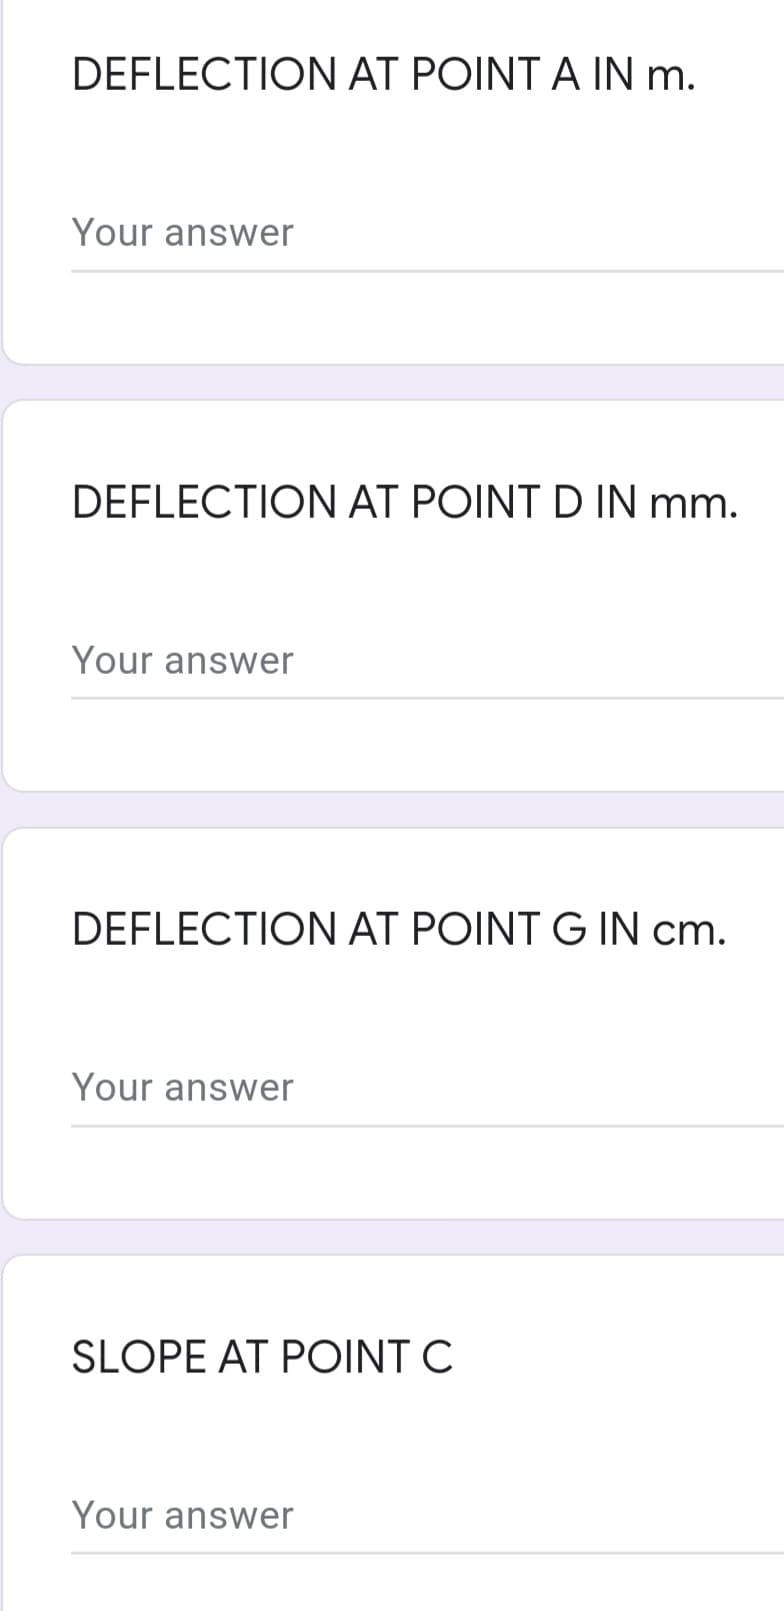 DEFLECTION AT POINT A IN m.
Your answer
DEFLECTION AT POINT D IN mm.
Your answer
DEFLECTION AT POINT G IN cm.
Your answer
SLOPE AT POINT C
Your answer